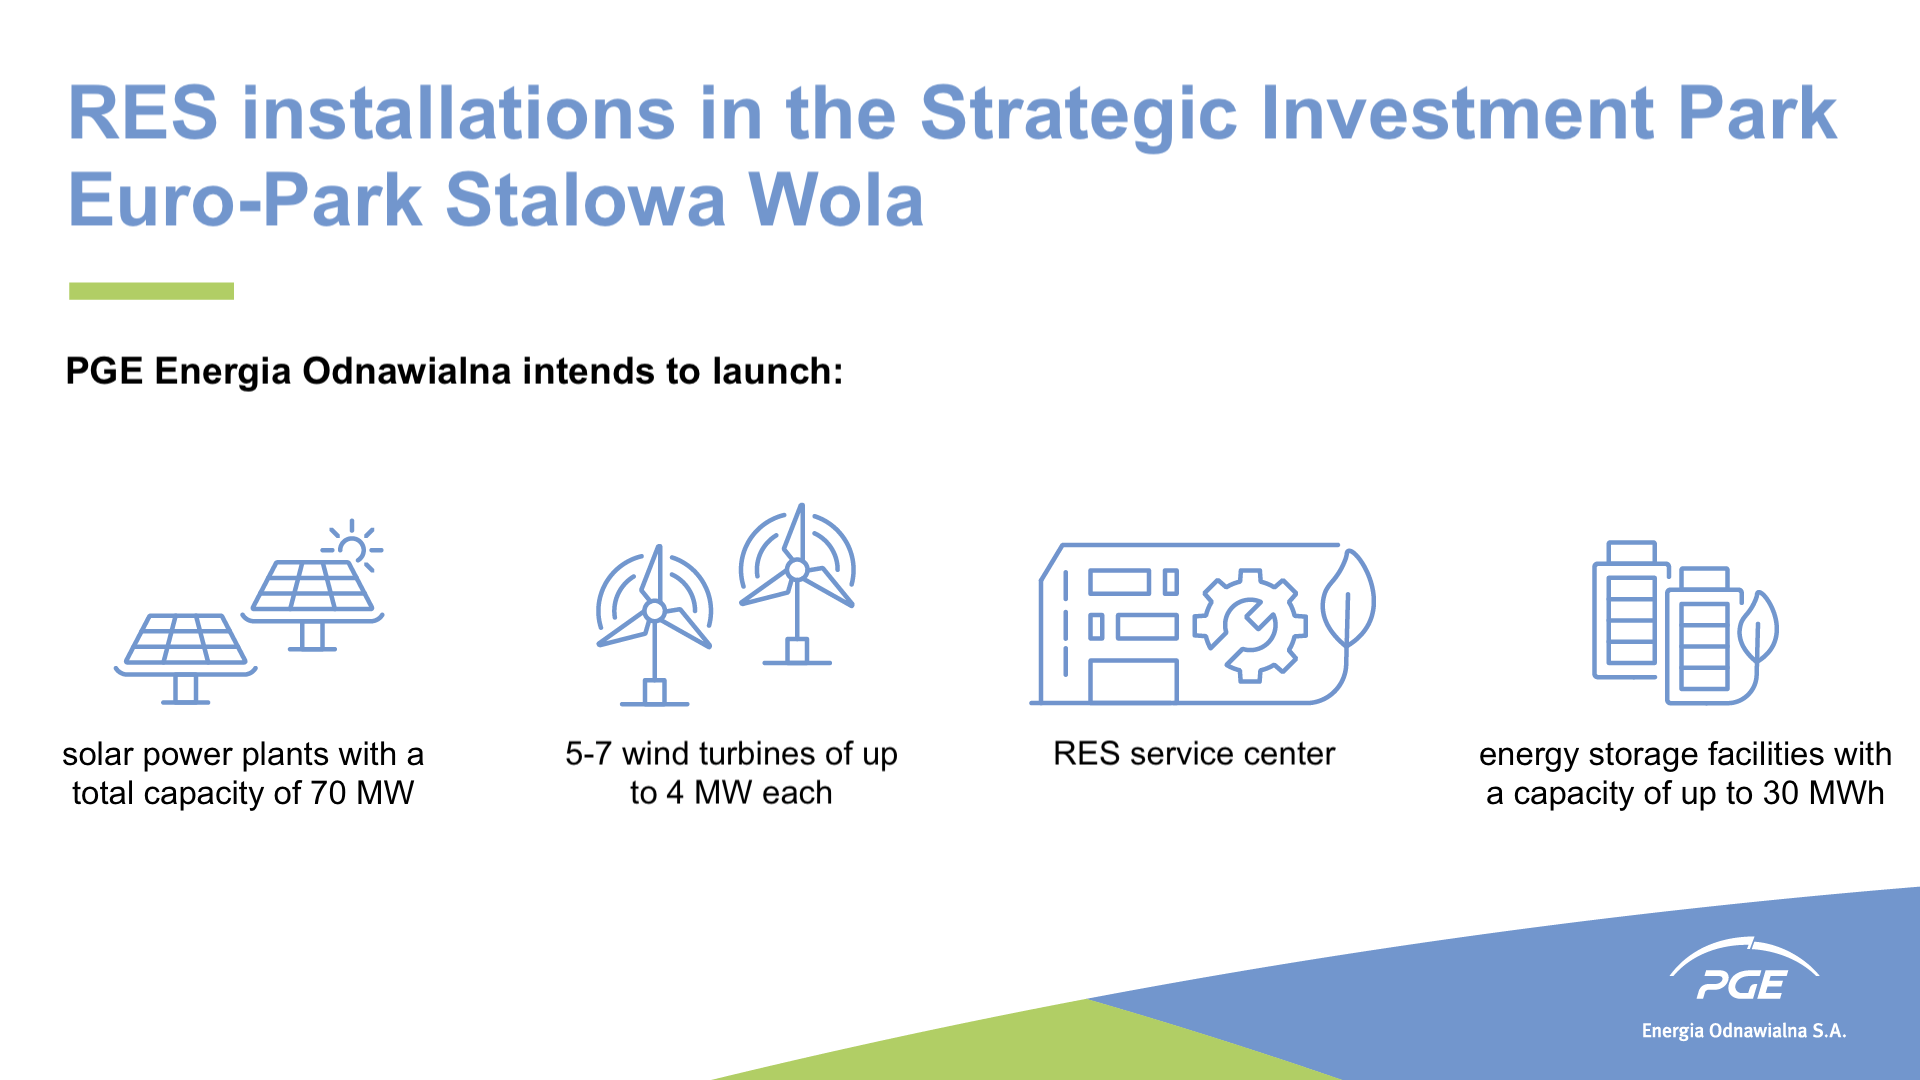 RES installations in the Strategic Investment Park Euro-Park Stalowa Wola